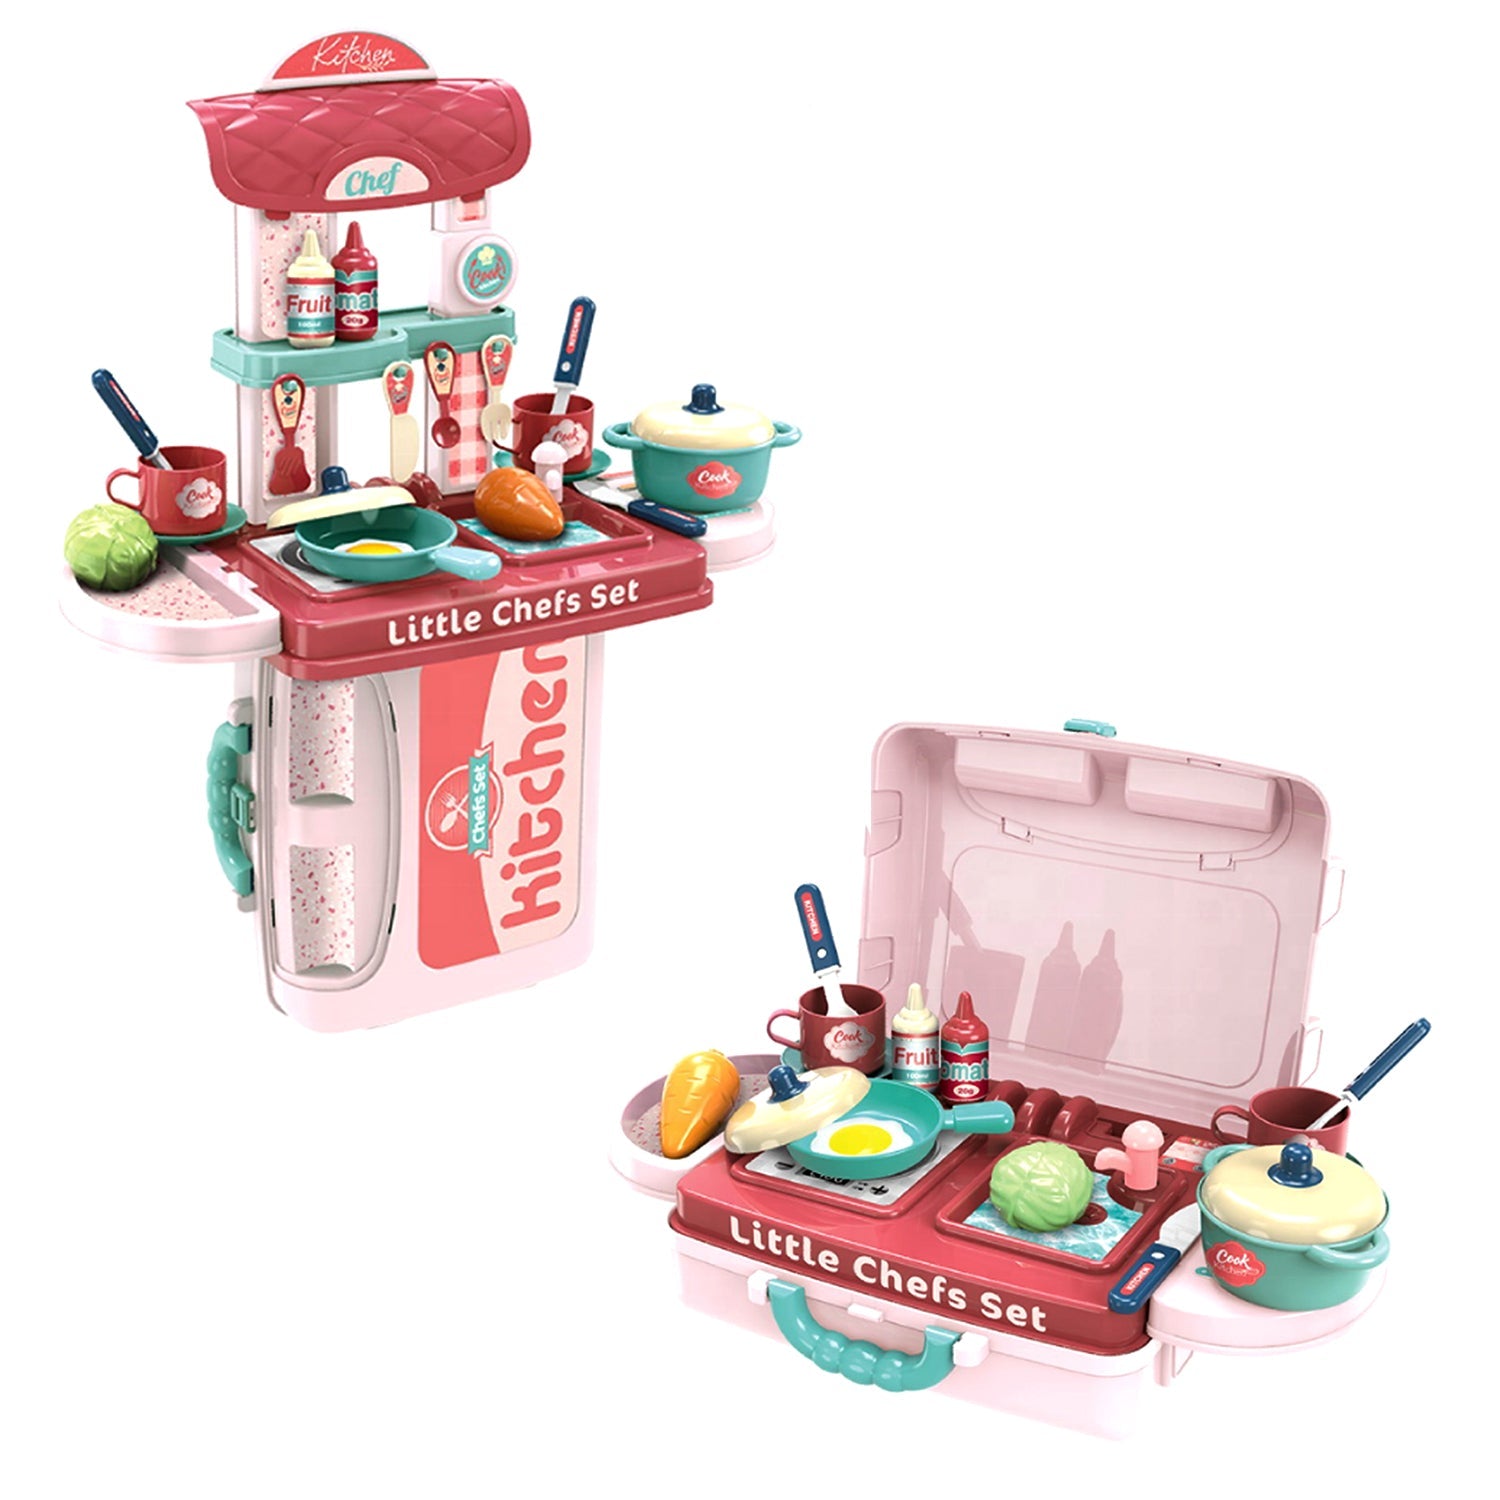 3916 Kitchen Cooking Set used in all kinds of household and official places specially for kids and children for their playing and enjoying purposes.